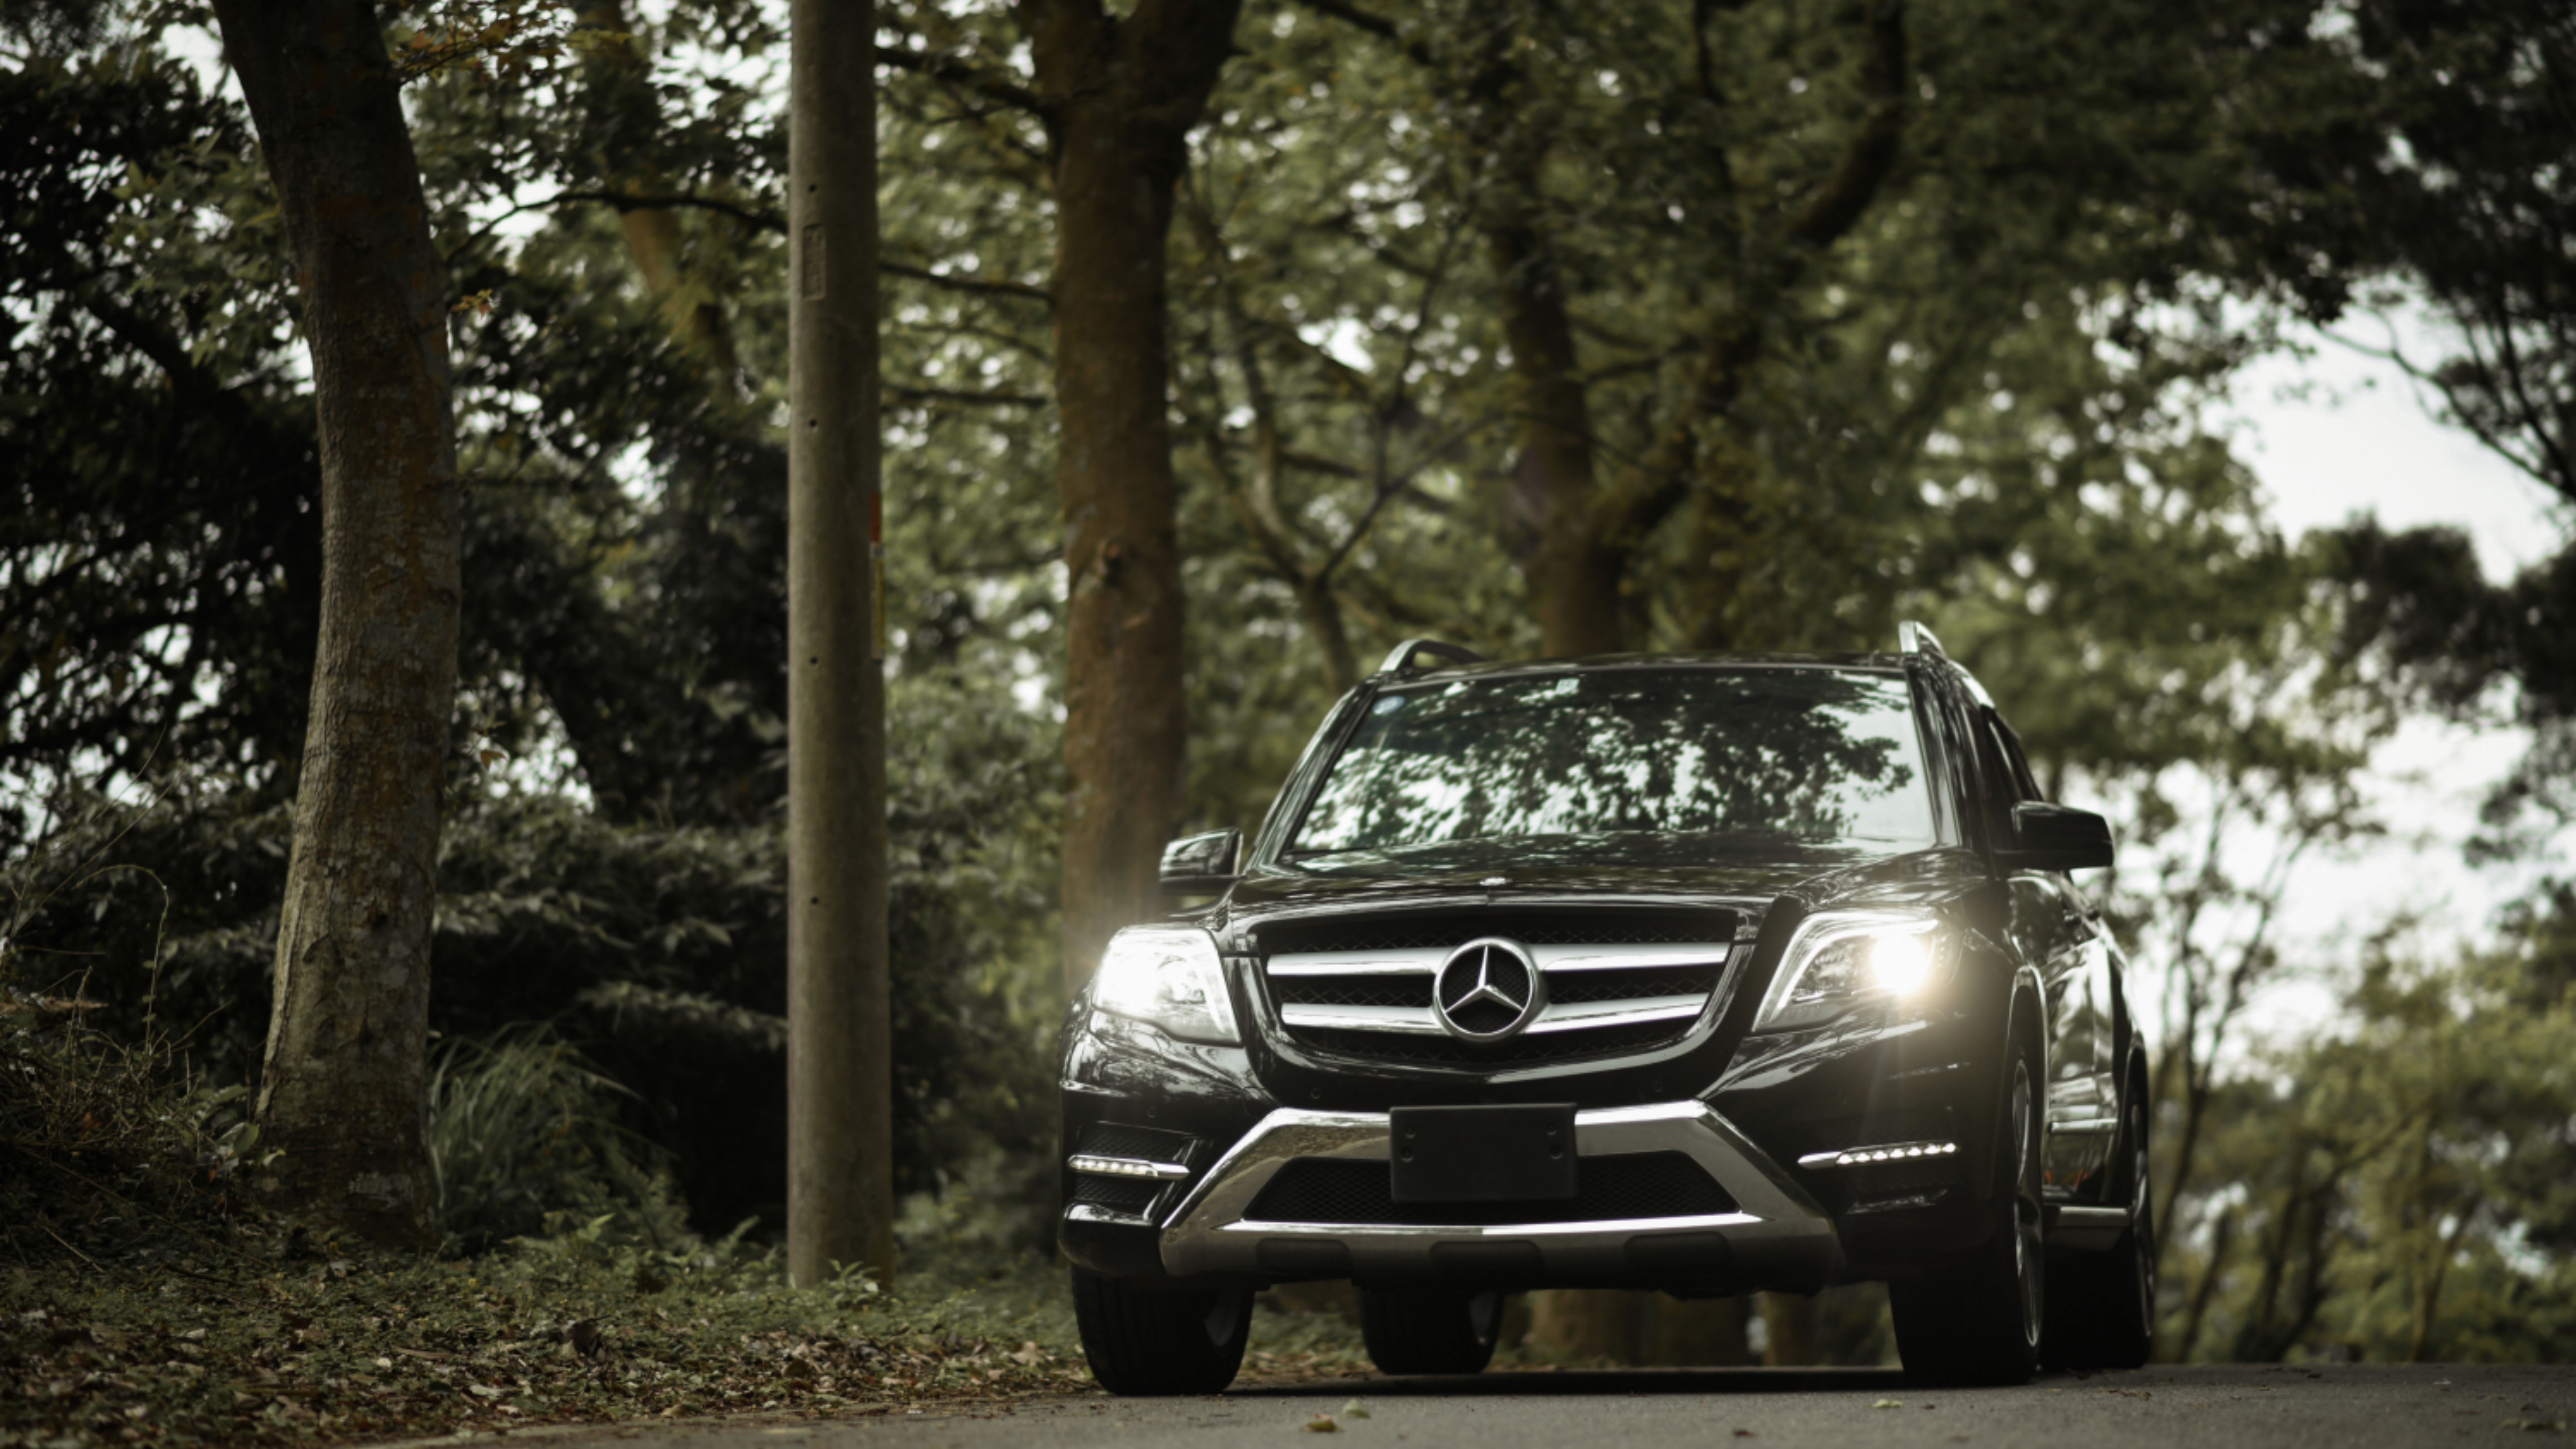 Black Mercedes Benz Car on Forest During Daytime. Wallpaper in 7680x4320 Resolution